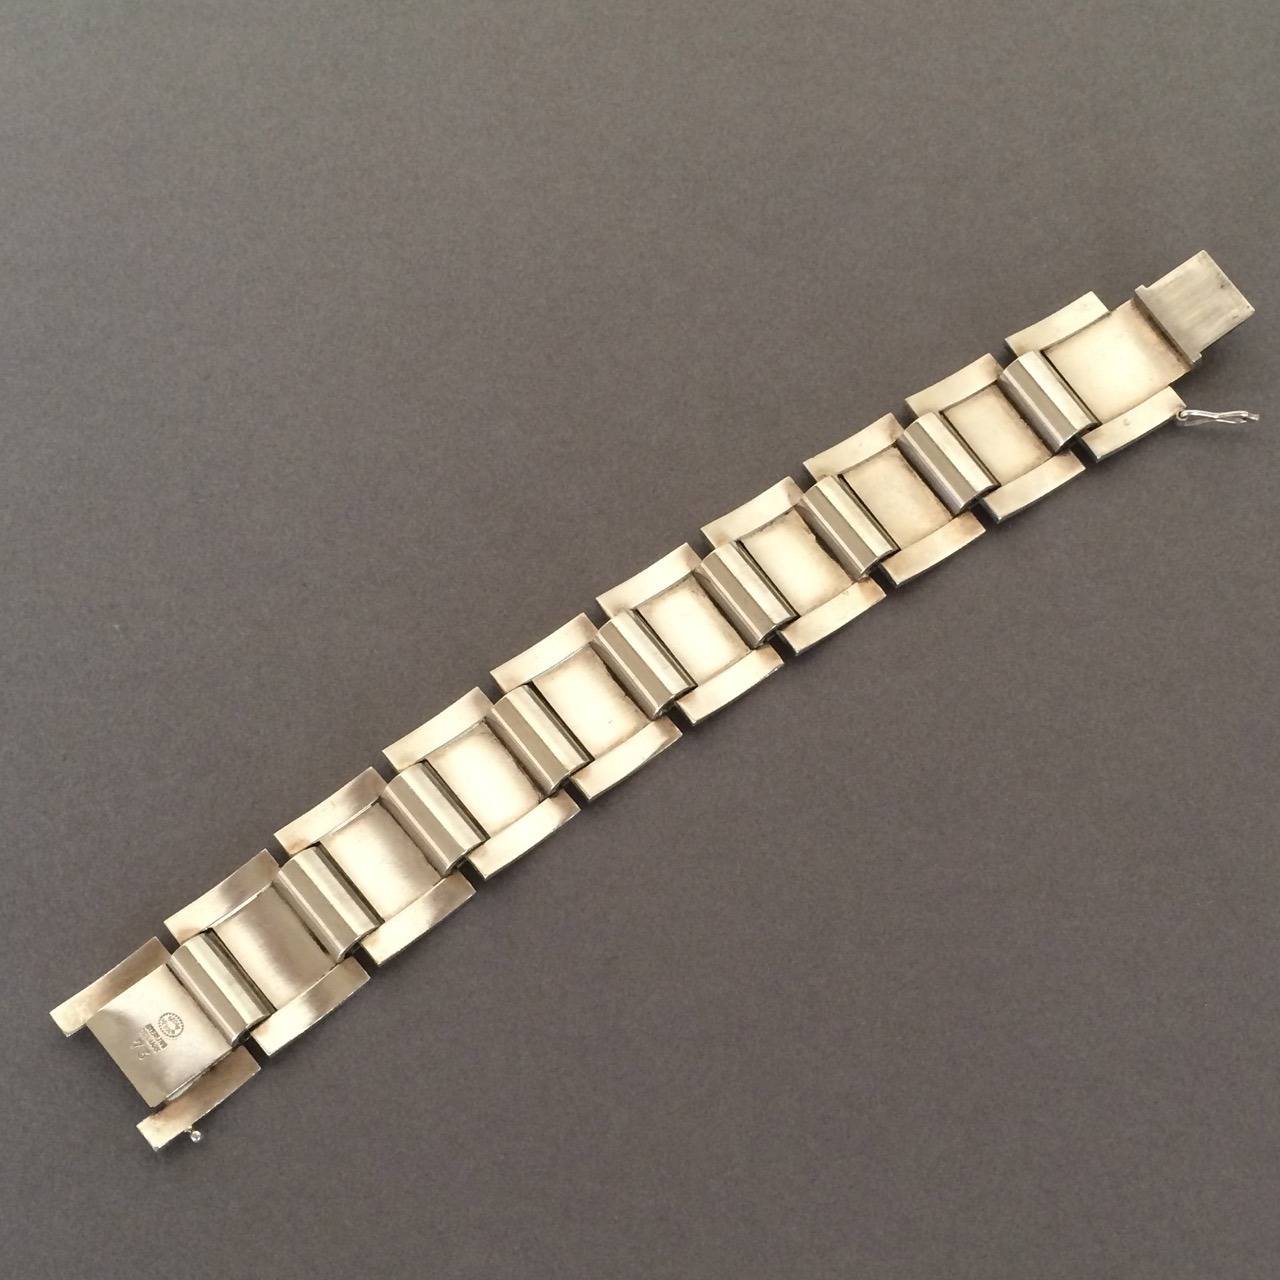 Georg Jensen Bracelet No 73 by Sigvard Bernadotte

Stunning curved solid segments hinged together beautifully. 

Measures 7